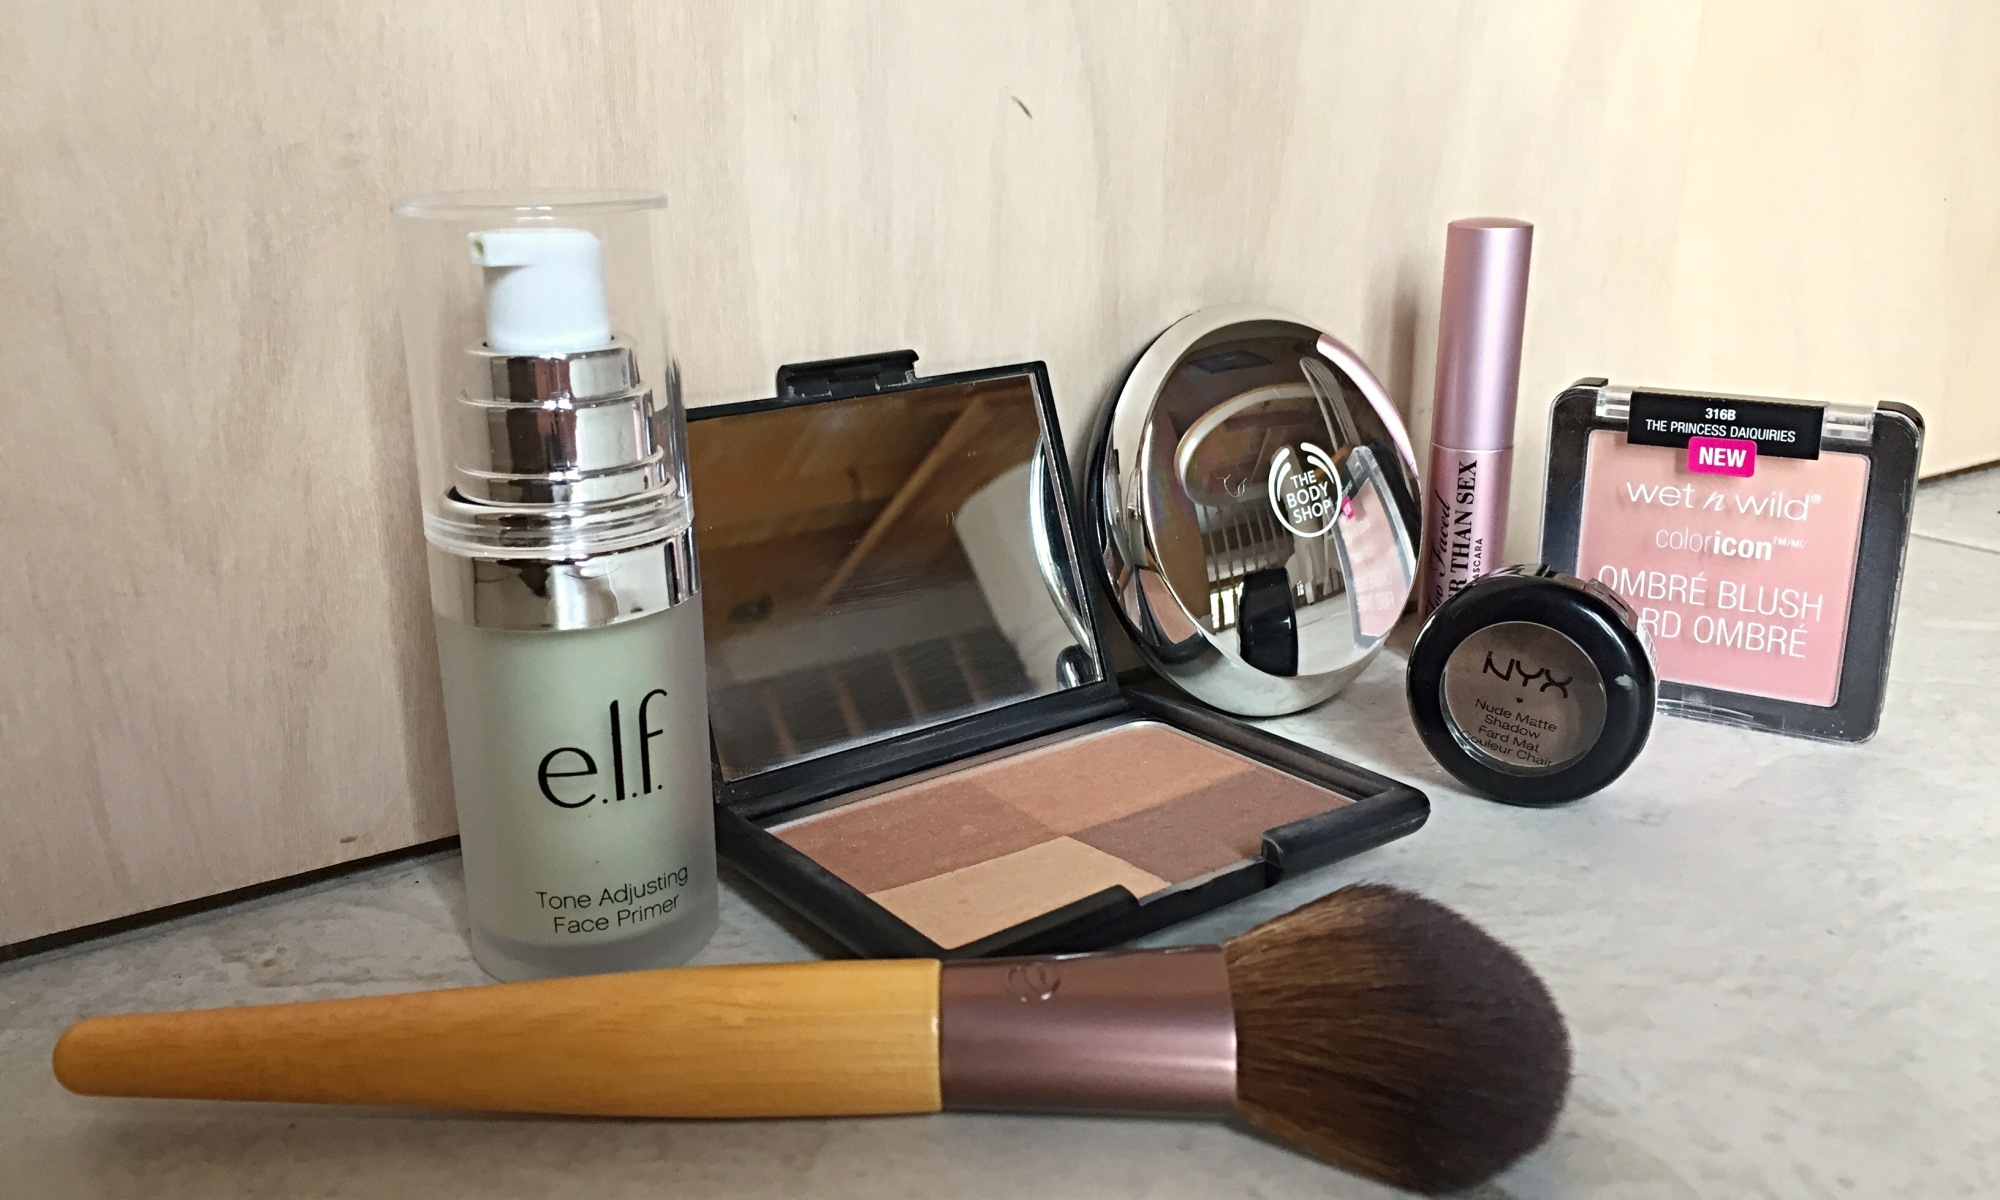 An image of a selection of non-toxic cosmetics, featuring brands such as e.l.f., The Body Shop, Wet N Wild, and Nyx.